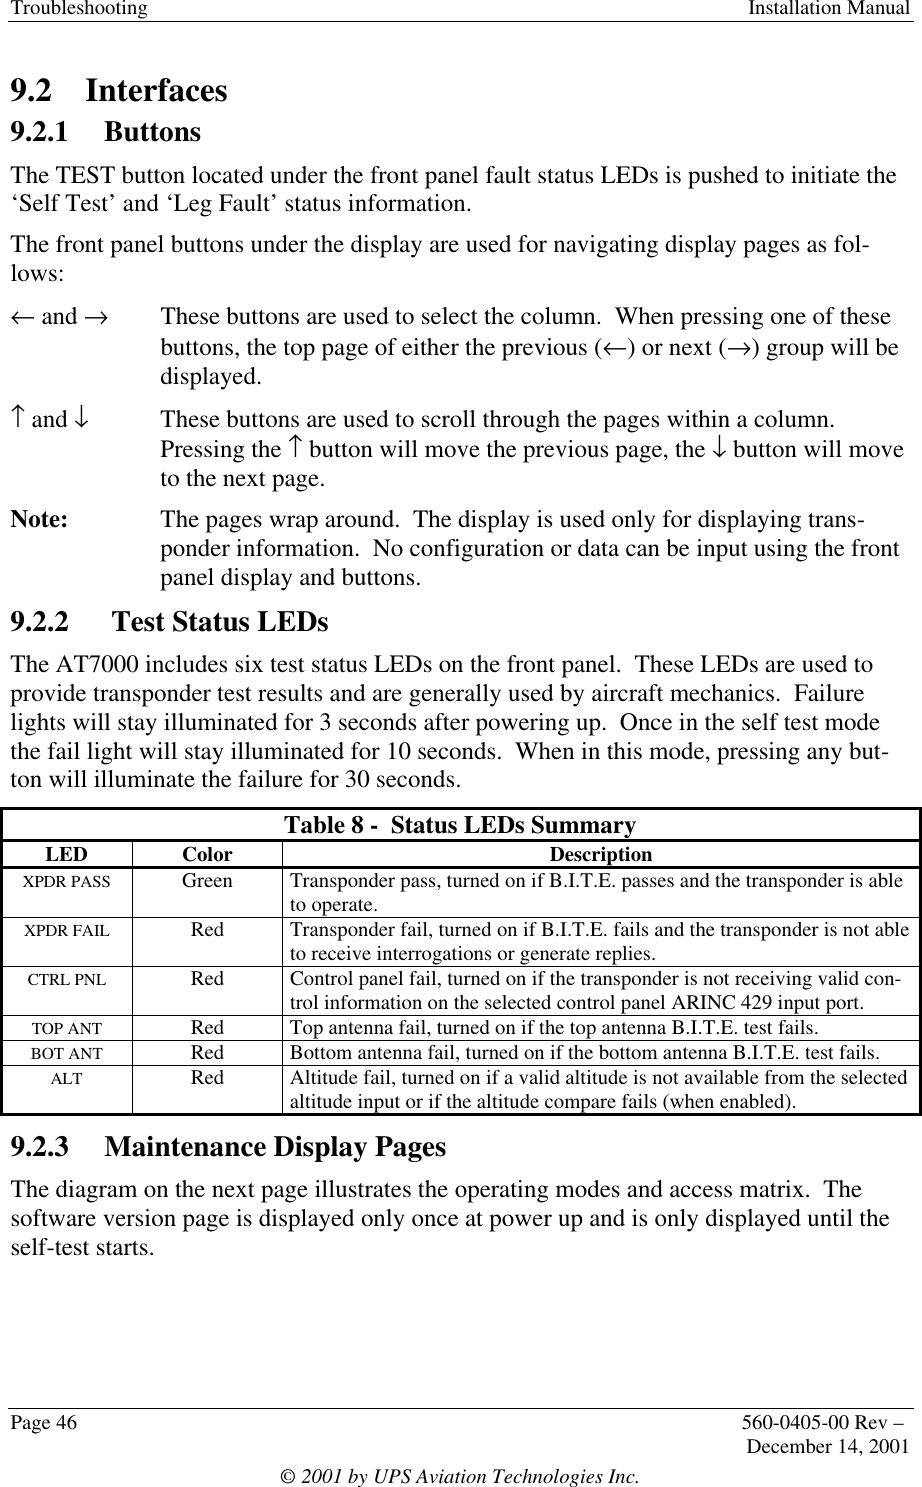 Troubleshooting  Installation ManualPage 46 560-0405-00 Rev –December 14, 2001© 2001 by UPS Aviation Technologies Inc.9.2 Interfaces9.2.1 ButtonsThe TEST button located under the front panel fault status LEDs is pushed to initiate the‘Self Test’ and ‘Leg Fault’ status information.The front panel buttons under the display are used for navigating display pages as fol-lows:← and →  These buttons are used to select the column.  When pressing one of thesebuttons, the top page of either the previous (←) or next (→) group will bedisplayed.↑ and ↓These buttons are used to scroll through the pages within a column.Pressing the ↑ button will move the previous page, the ↓ button will moveto the next page.Note: The pages wrap around.  The display is used only for displaying trans-ponder information.  No configuration or data can be input using the frontpanel display and buttons.9.2.2  Test Status LEDsThe AT7000 includes six test status LEDs on the front panel.  These LEDs are used toprovide transponder test results and are generally used by aircraft mechanics.  Failurelights will stay illuminated for 3 seconds after powering up.  Once in the self test modethe fail light will stay illuminated for 10 seconds.  When in this mode, pressing any but-ton will illuminate the failure for 30 seconds.Table 8 -  Status LEDs SummaryLED Color DescriptionXPDR PASS Green Transponder pass, turned on if B.I.T.E. passes and the transponder is ableto operate.XPDR FAIL Red Transponder fail, turned on if B.I.T.E. fails and the transponder is not ableto receive interrogations or generate replies.CTRL PNL Red Control panel fail, turned on if the transponder is not receiving valid con-trol information on the selected control panel ARINC 429 input port.TOP ANT Red Top antenna fail, turned on if the top antenna B.I.T.E. test fails.BOT ANT Red Bottom antenna fail, turned on if the bottom antenna B.I.T.E. test fails.ALT Red Altitude fail, turned on if a valid altitude is not available from the selectedaltitude input or if the altitude compare fails (when enabled).9.2.3 Maintenance Display PagesThe diagram on the next page illustrates the operating modes and access matrix.  Thesoftware version page is displayed only once at power up and is only displayed until theself-test starts.